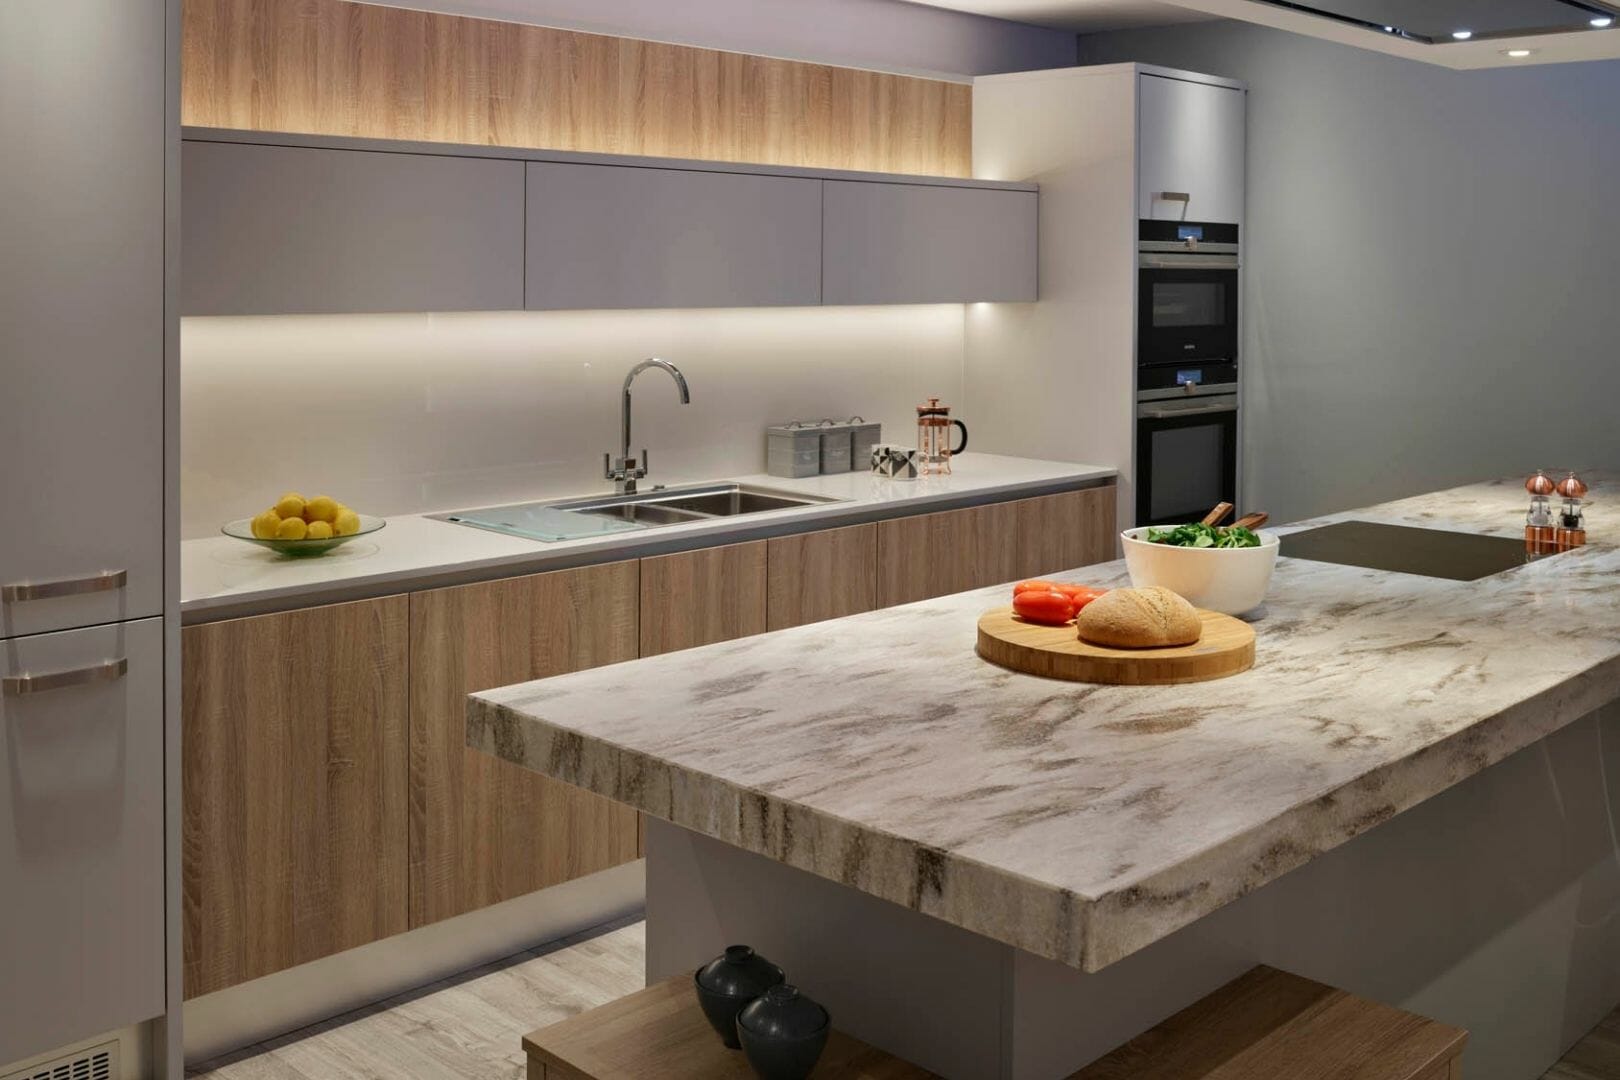 Wooden and marble kitchen